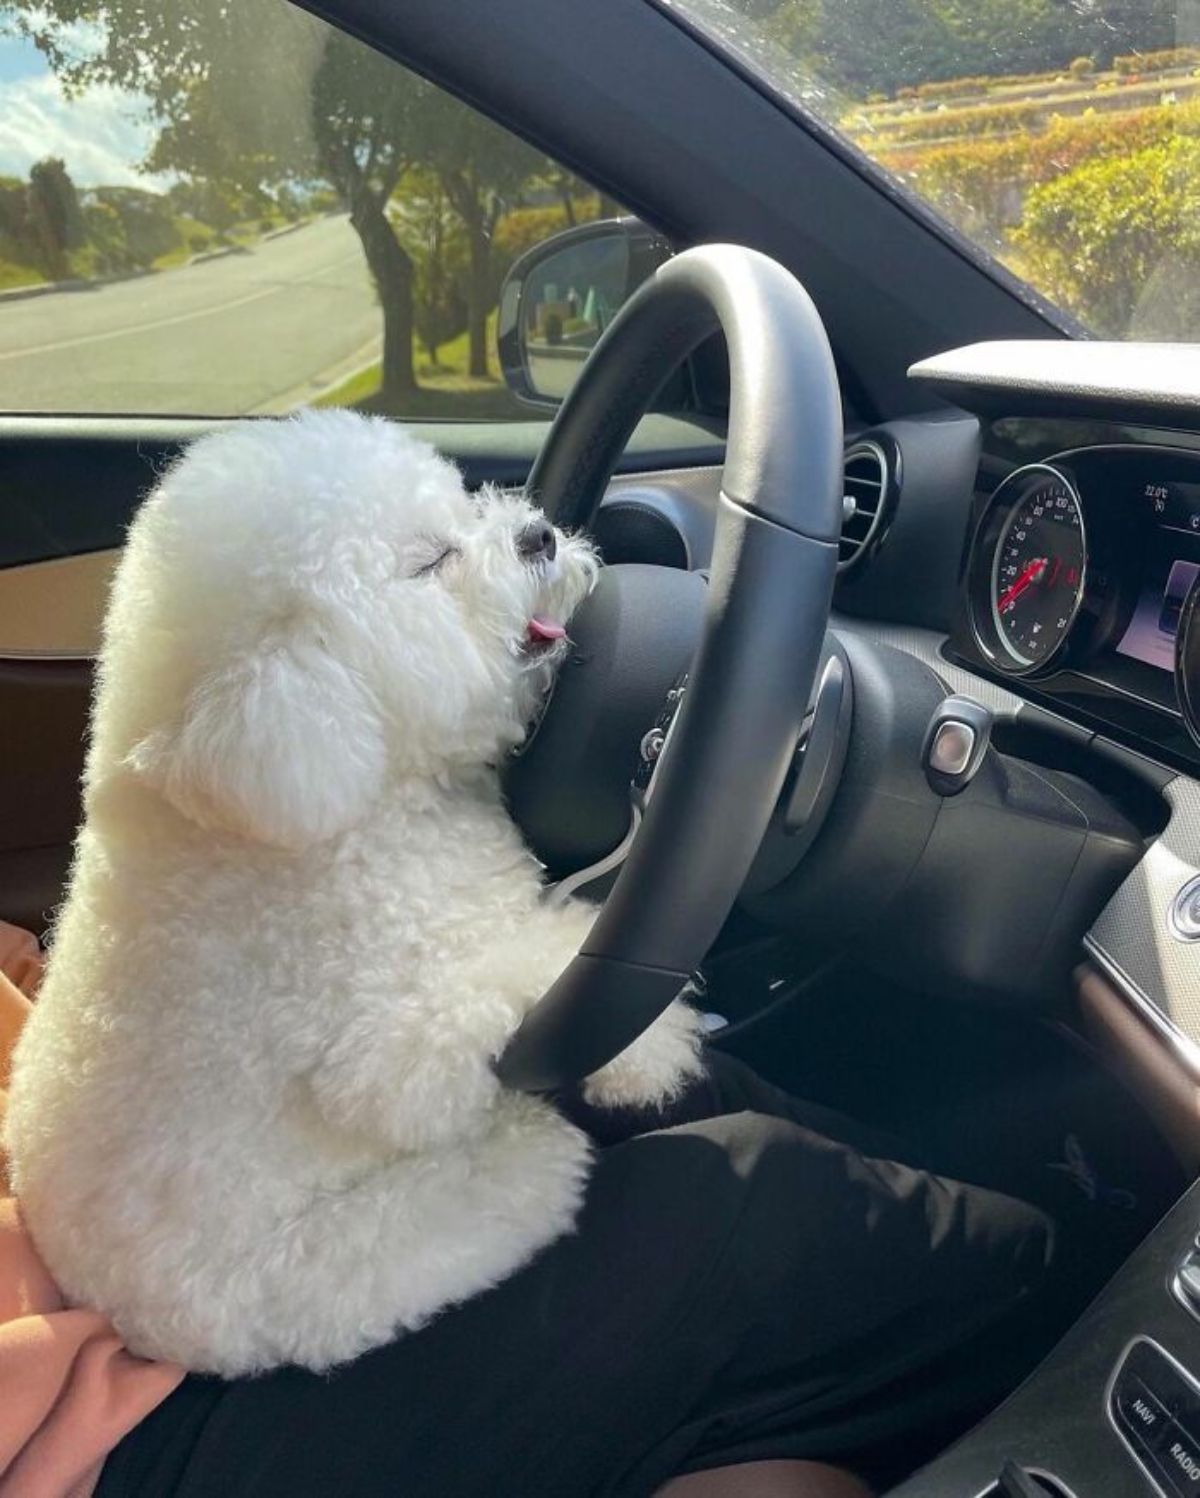 small fluffy white dog sleeping while sitting on someone's lap in a driver's seat of a vehicle